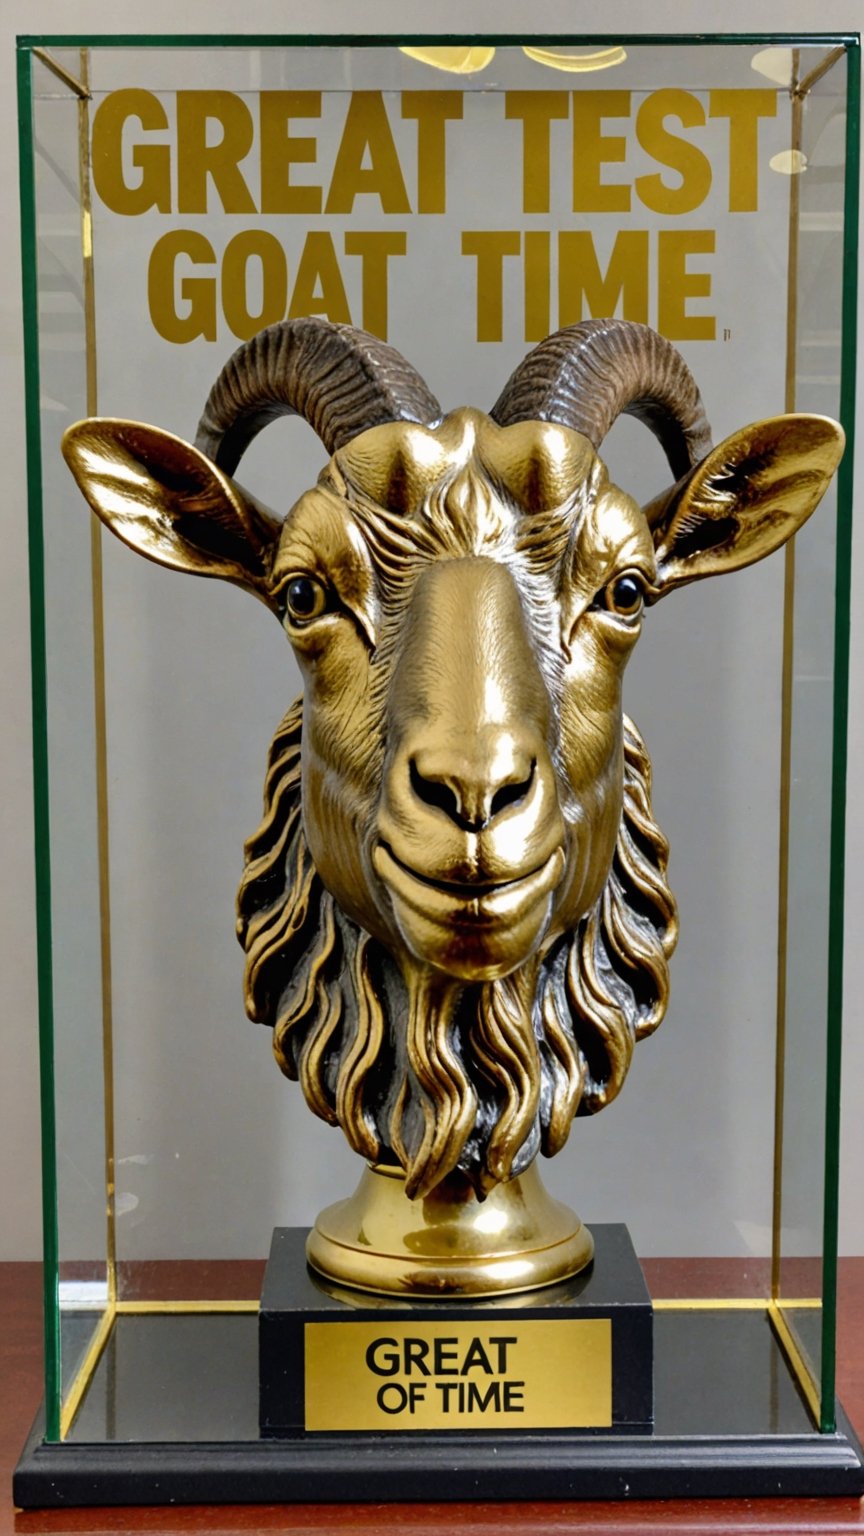 Photo of gold goat head trophy in trophy case with text bubble that says "great test of time"